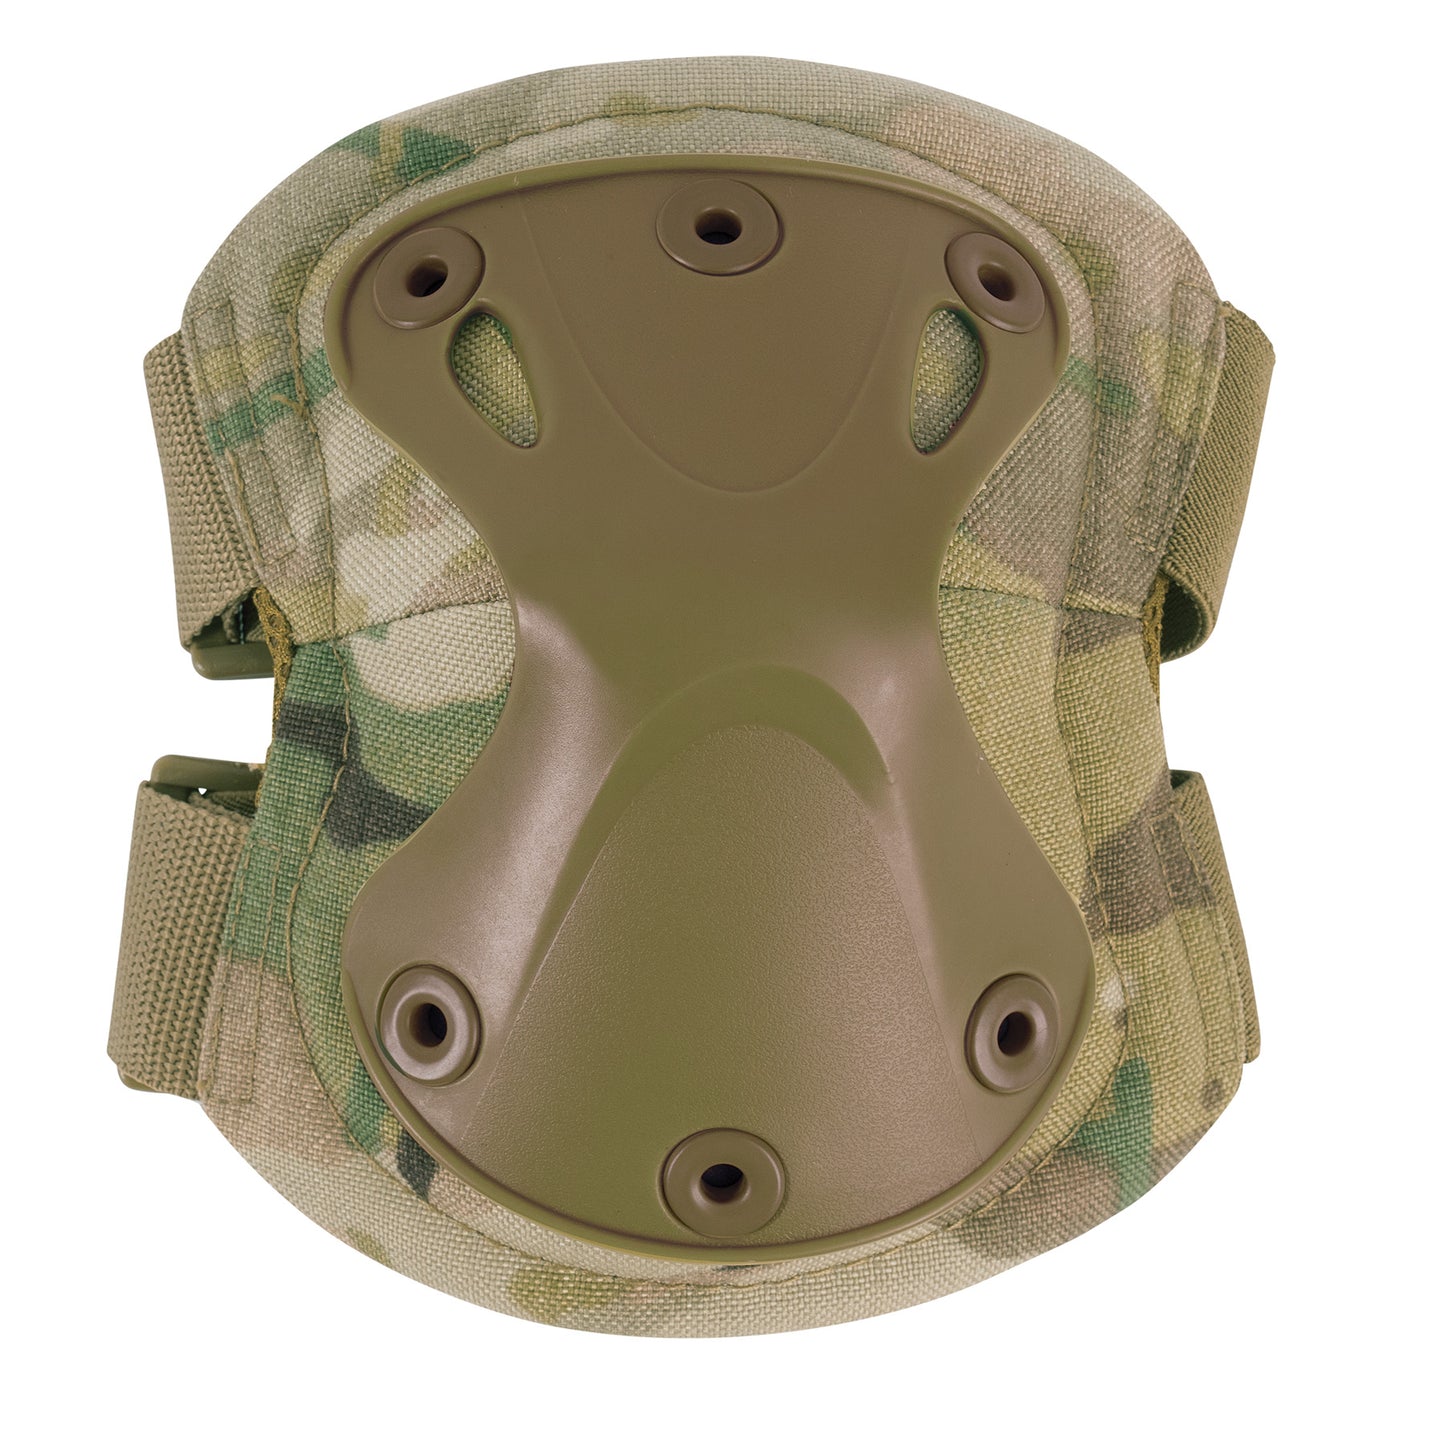 Rothco Low-Profile Tactical Knee Pads